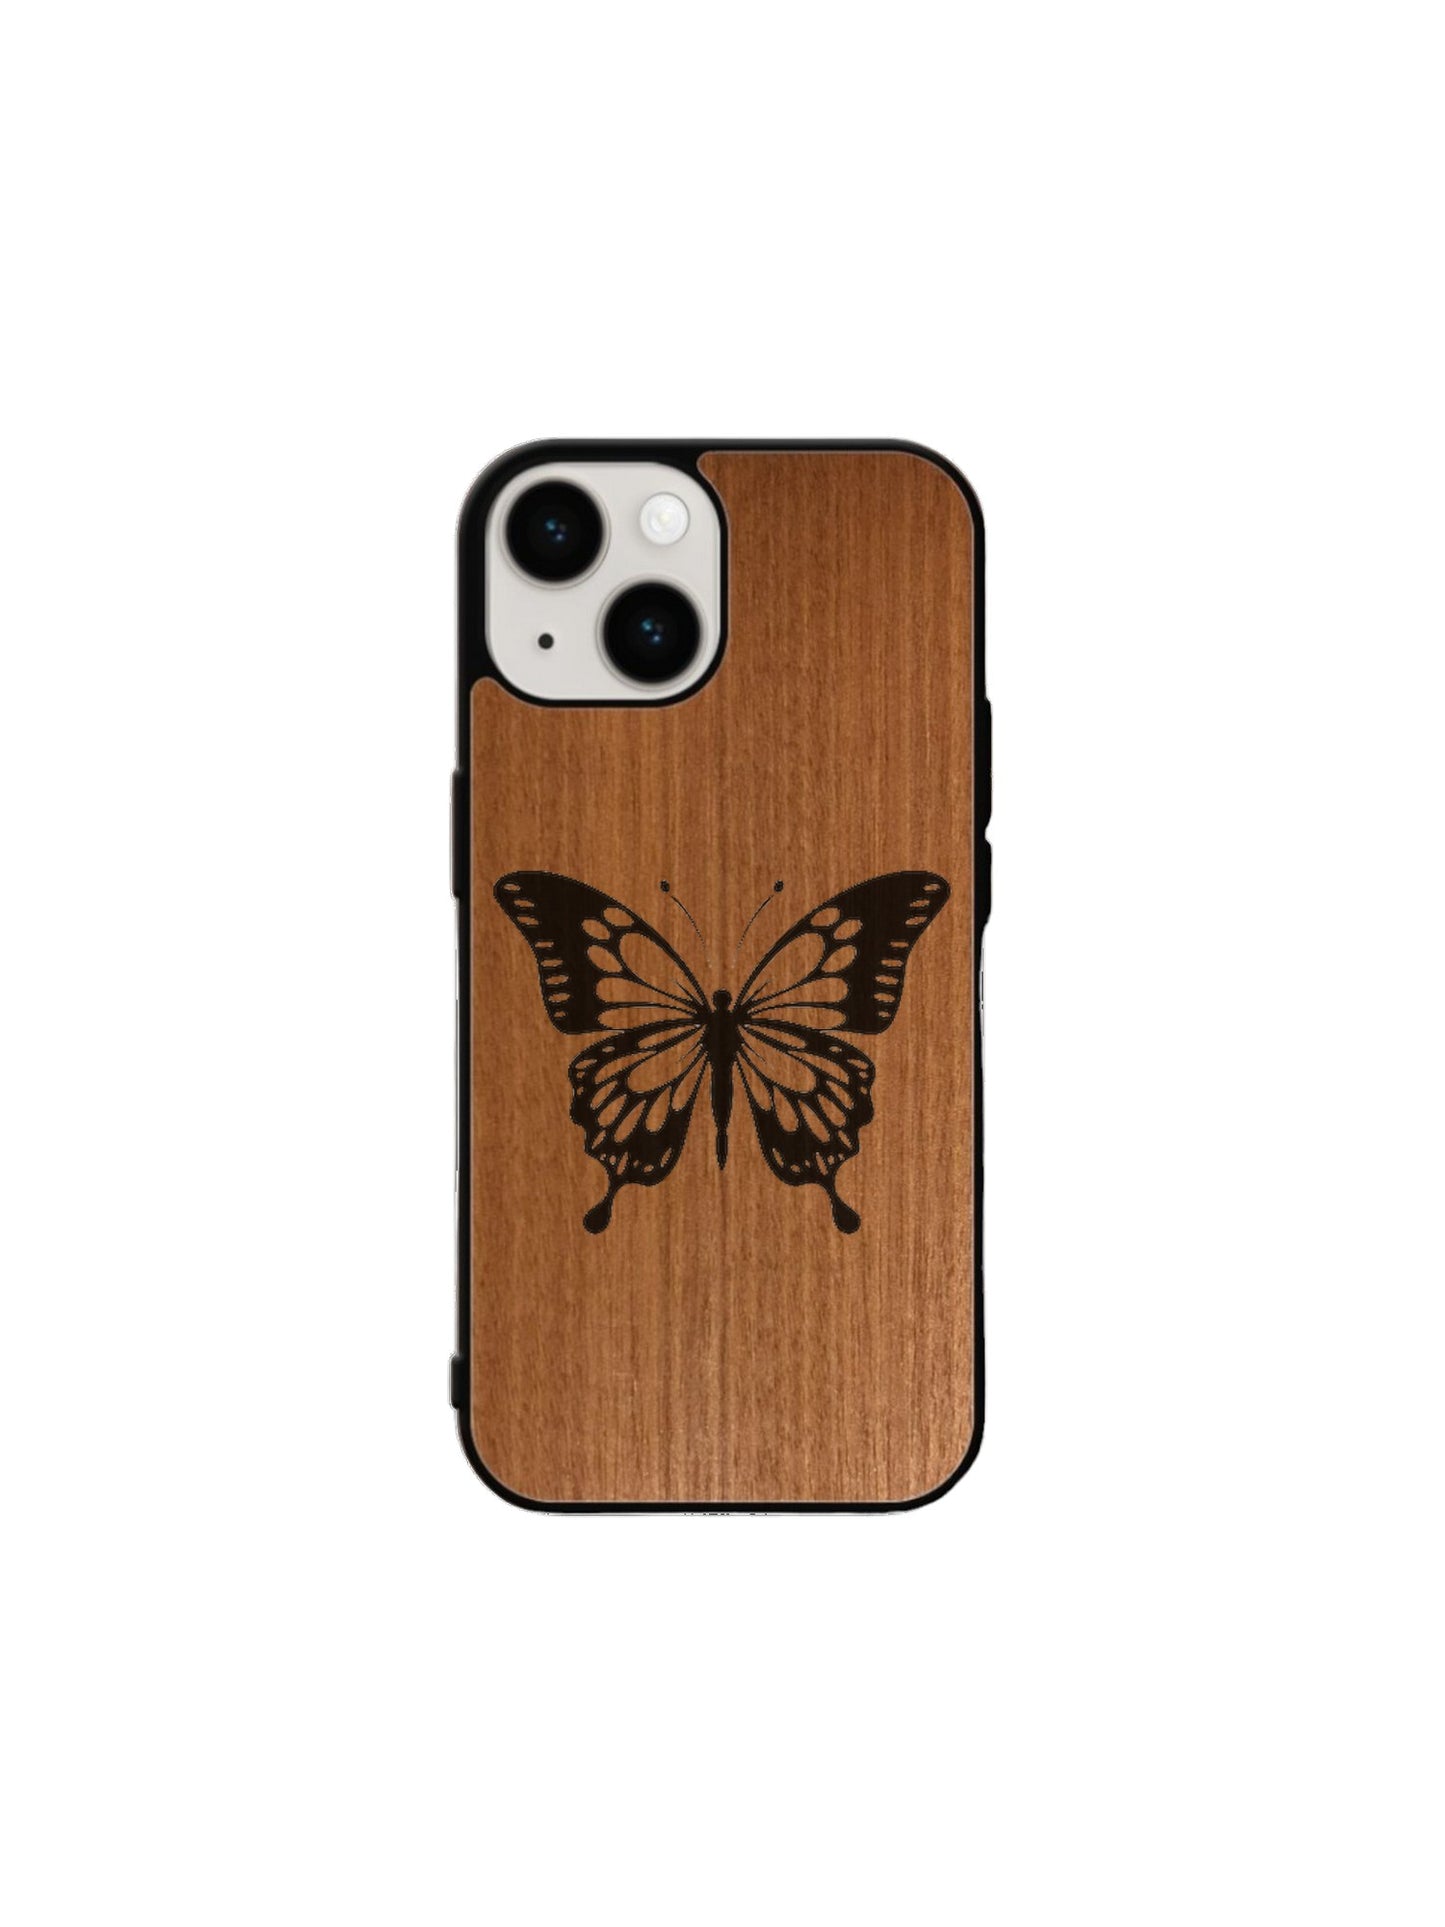 Iphone case - Butterfly